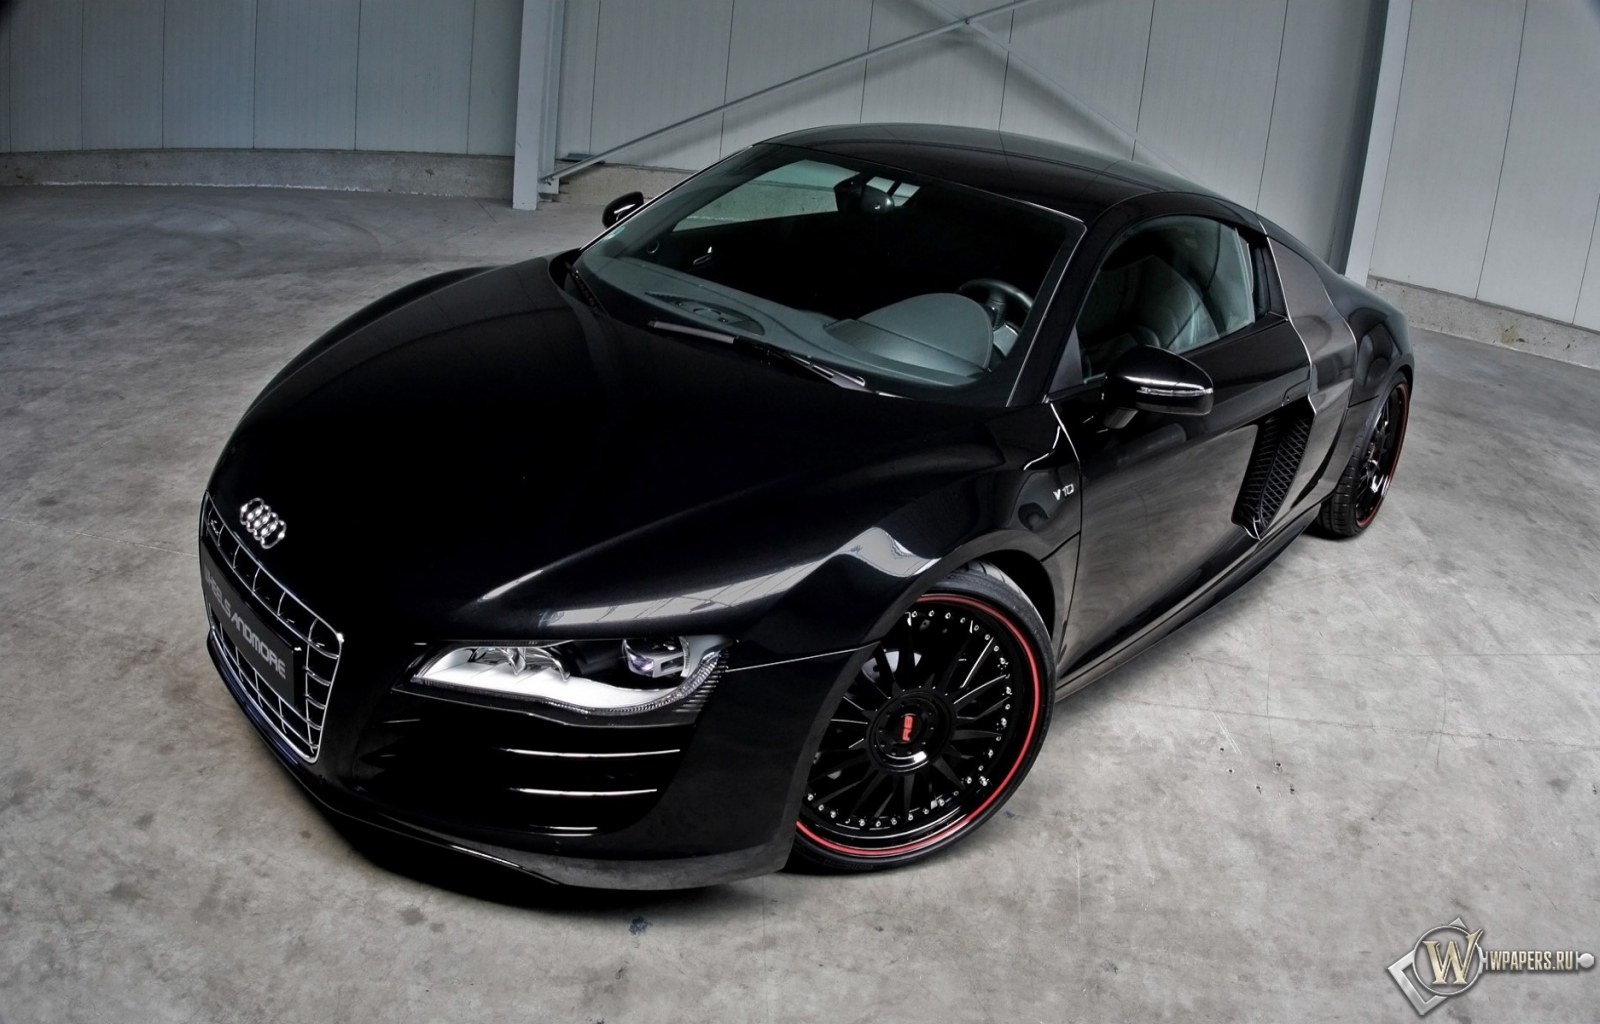 2011 Wheelsandmore Audi R8 V10 .6 - Front Angle Top 1600x1024